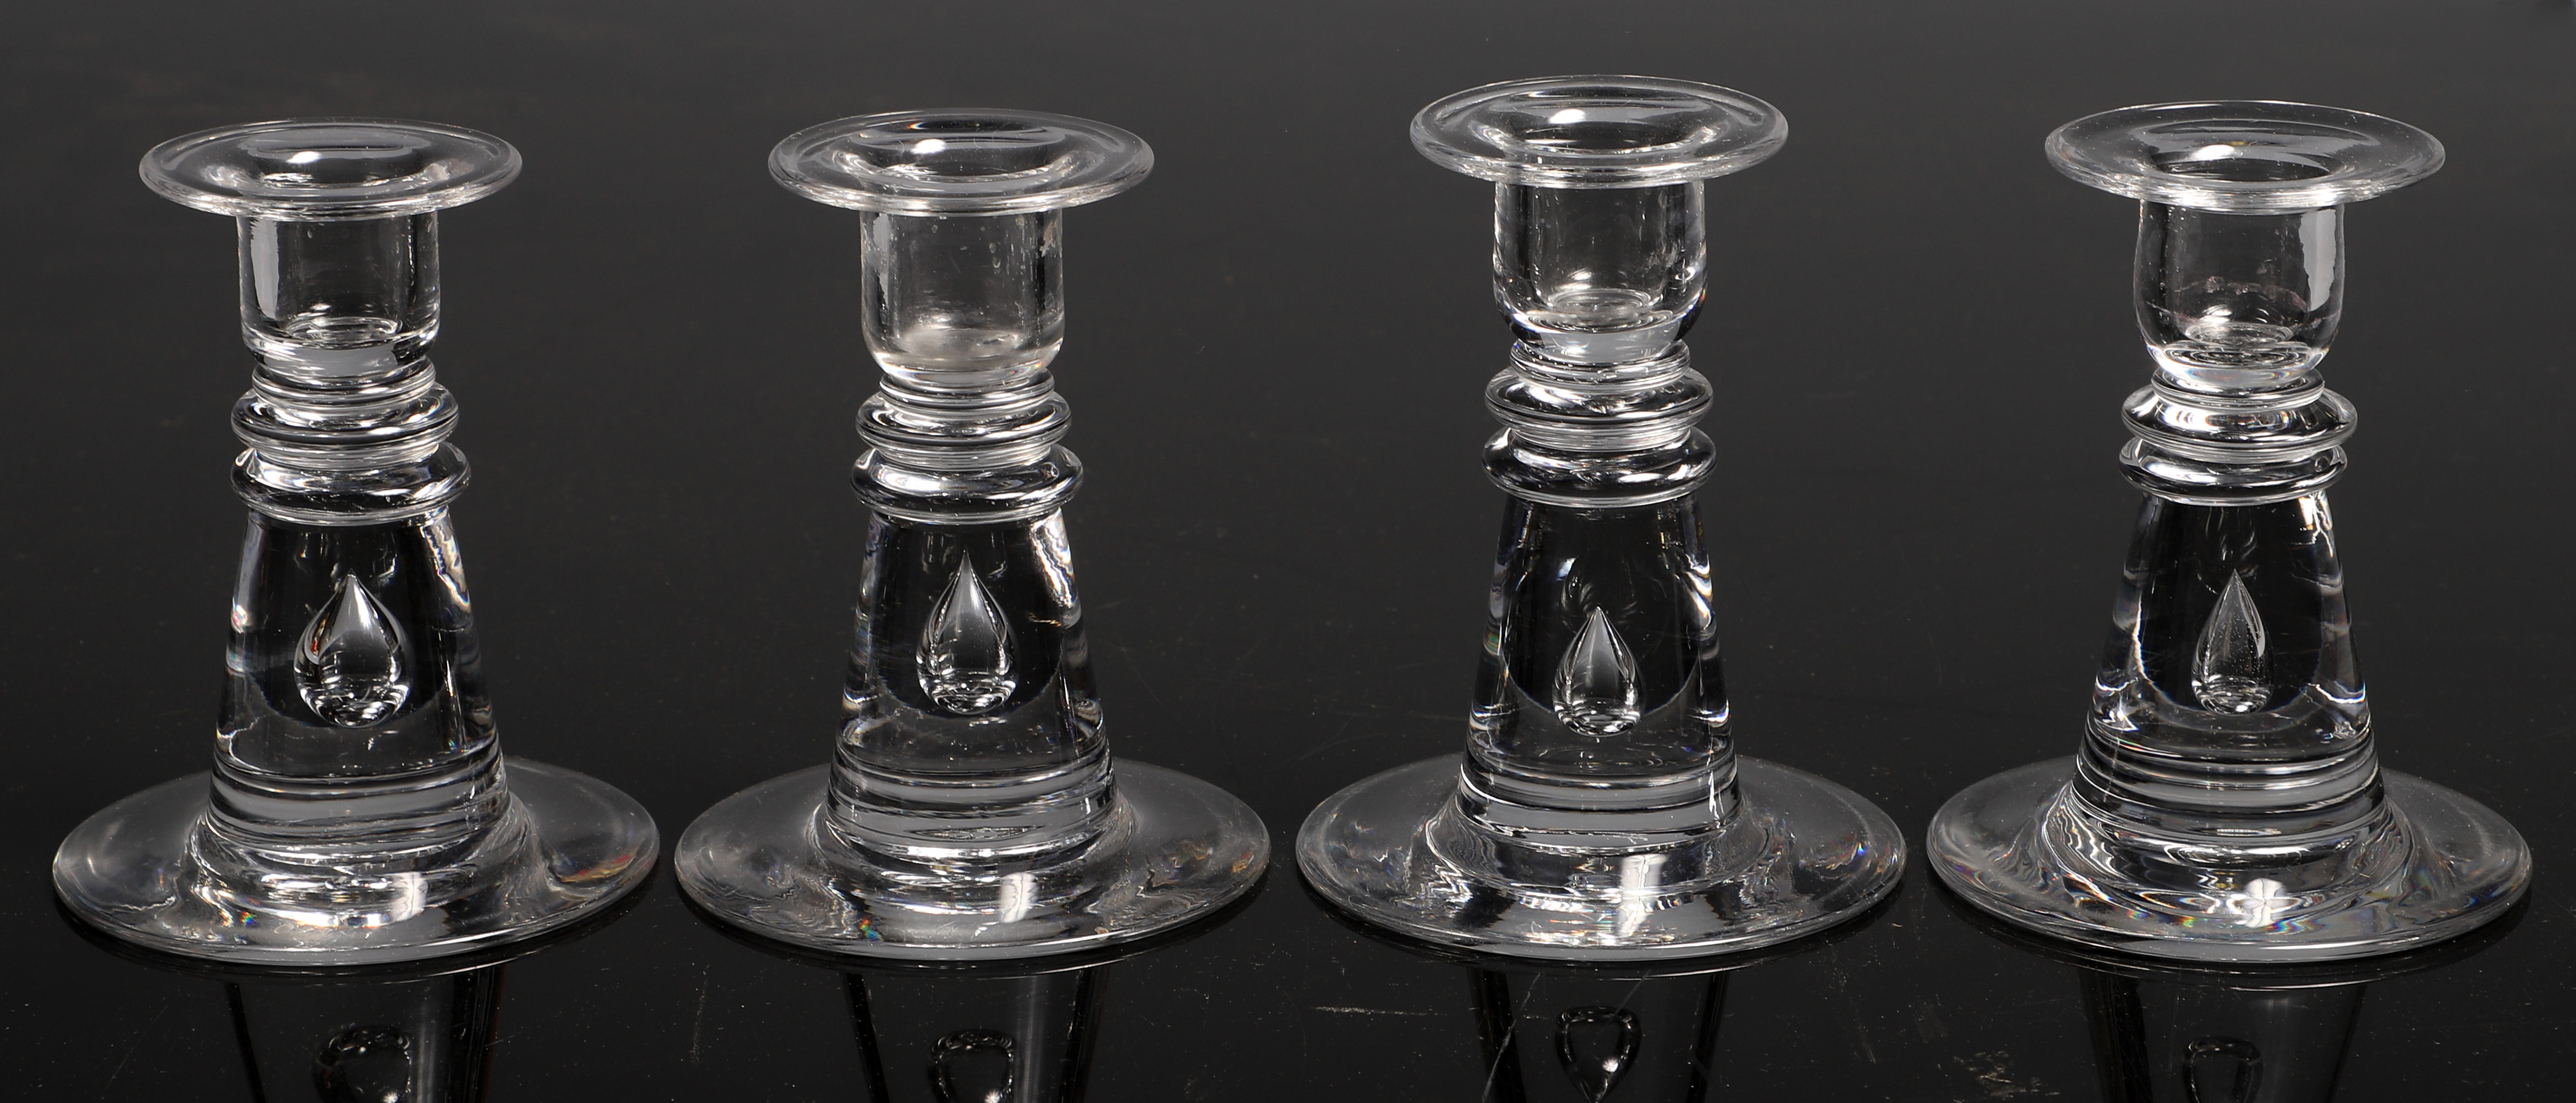 (4) Steuben crystal candlesticks with